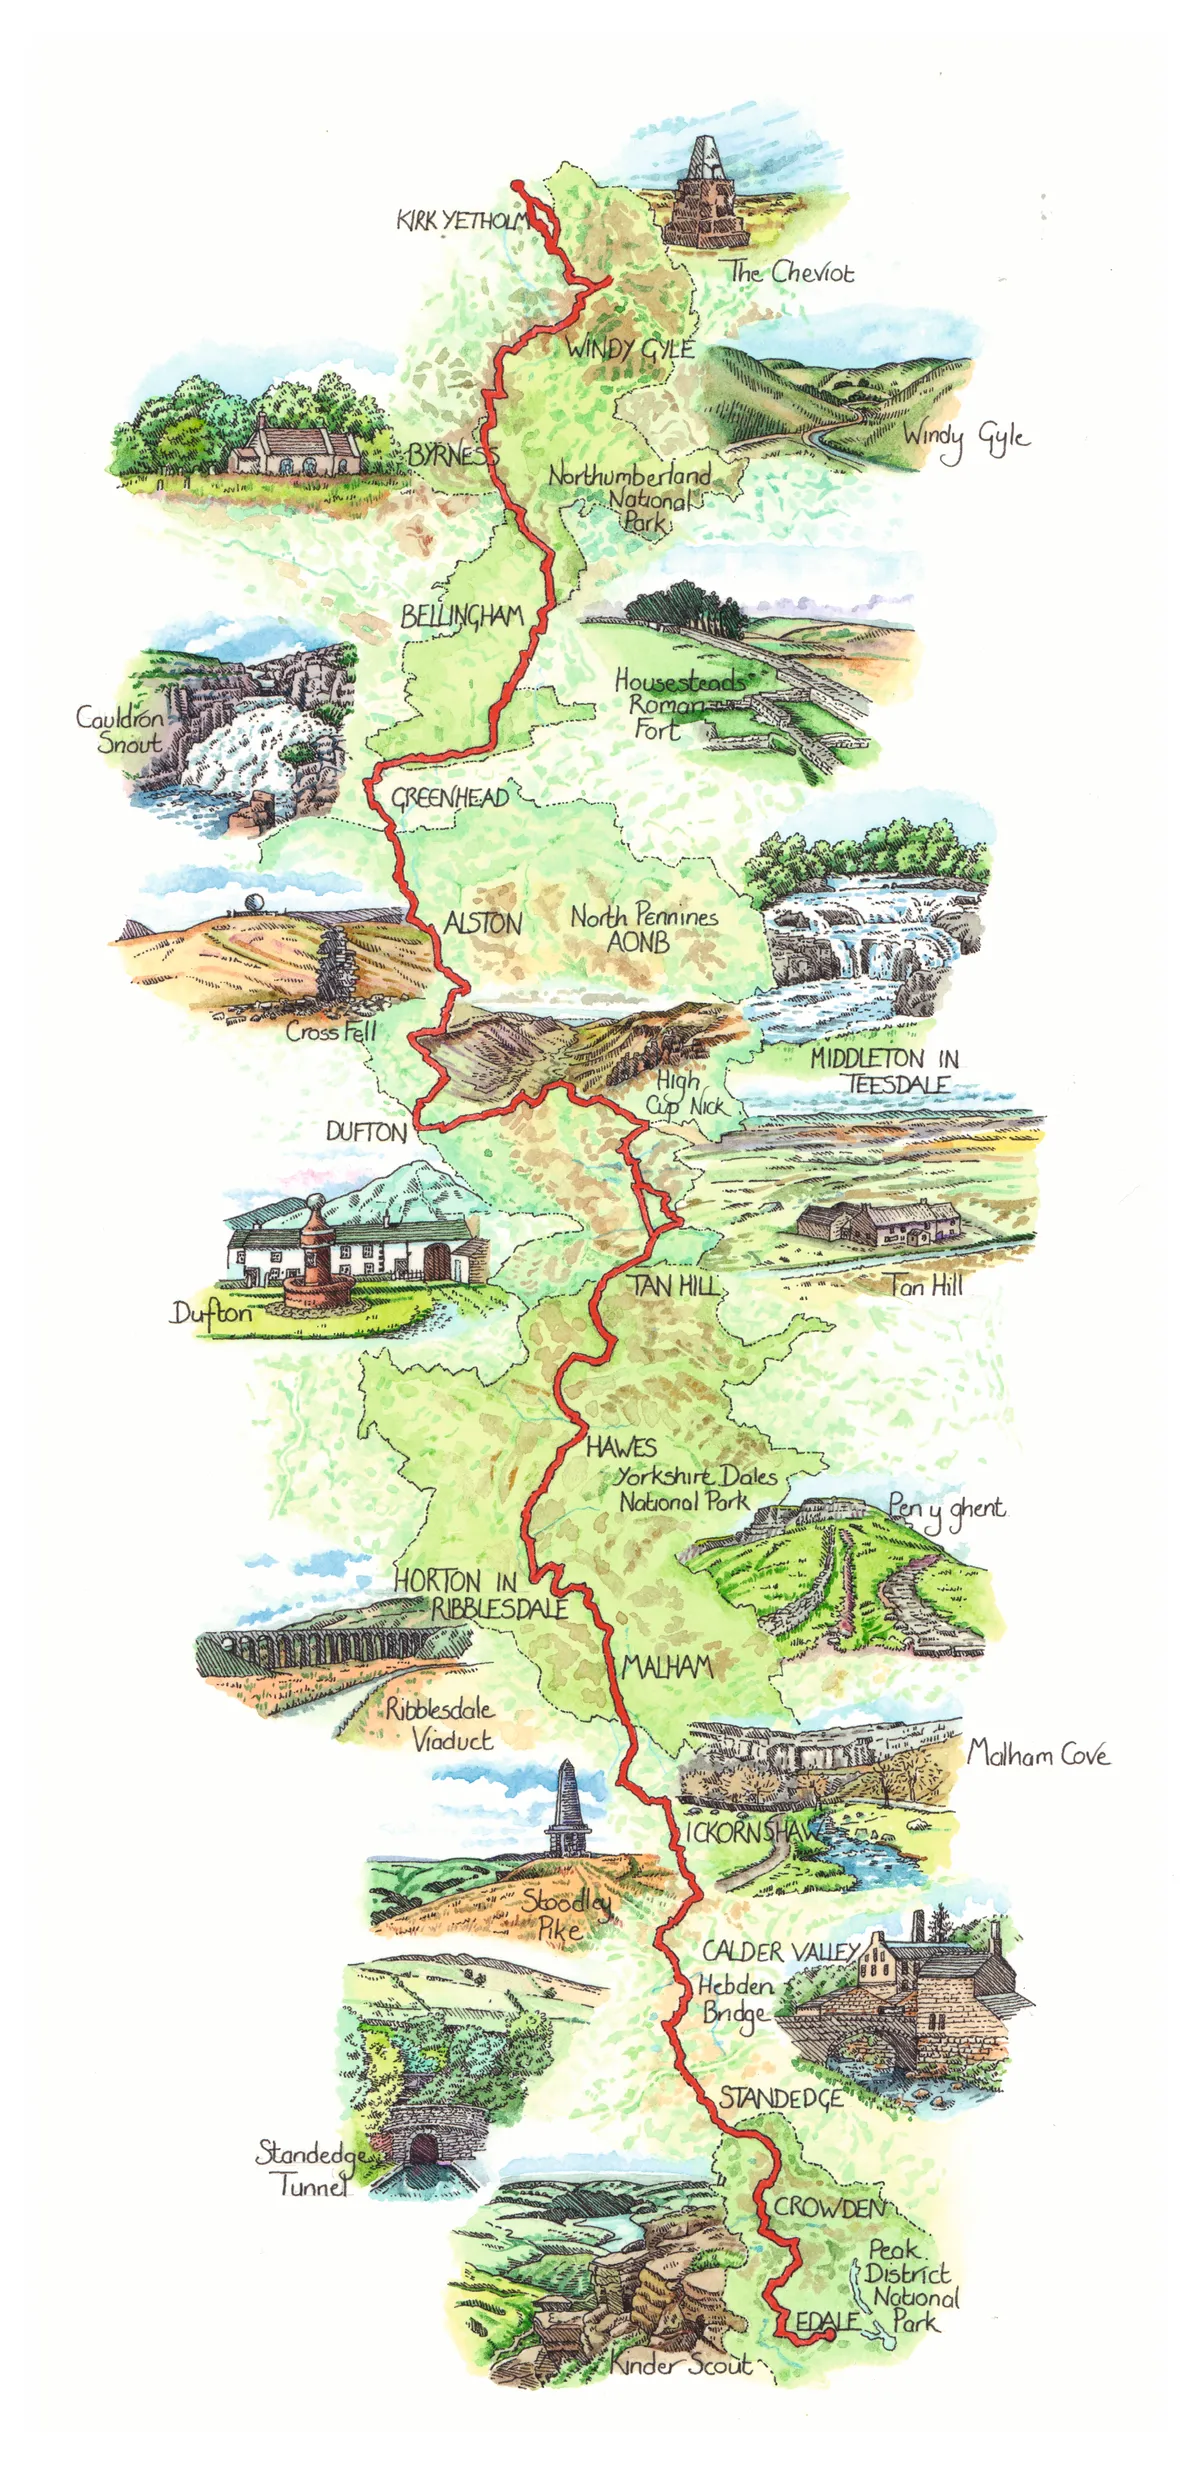 Pennine Way walking route and map